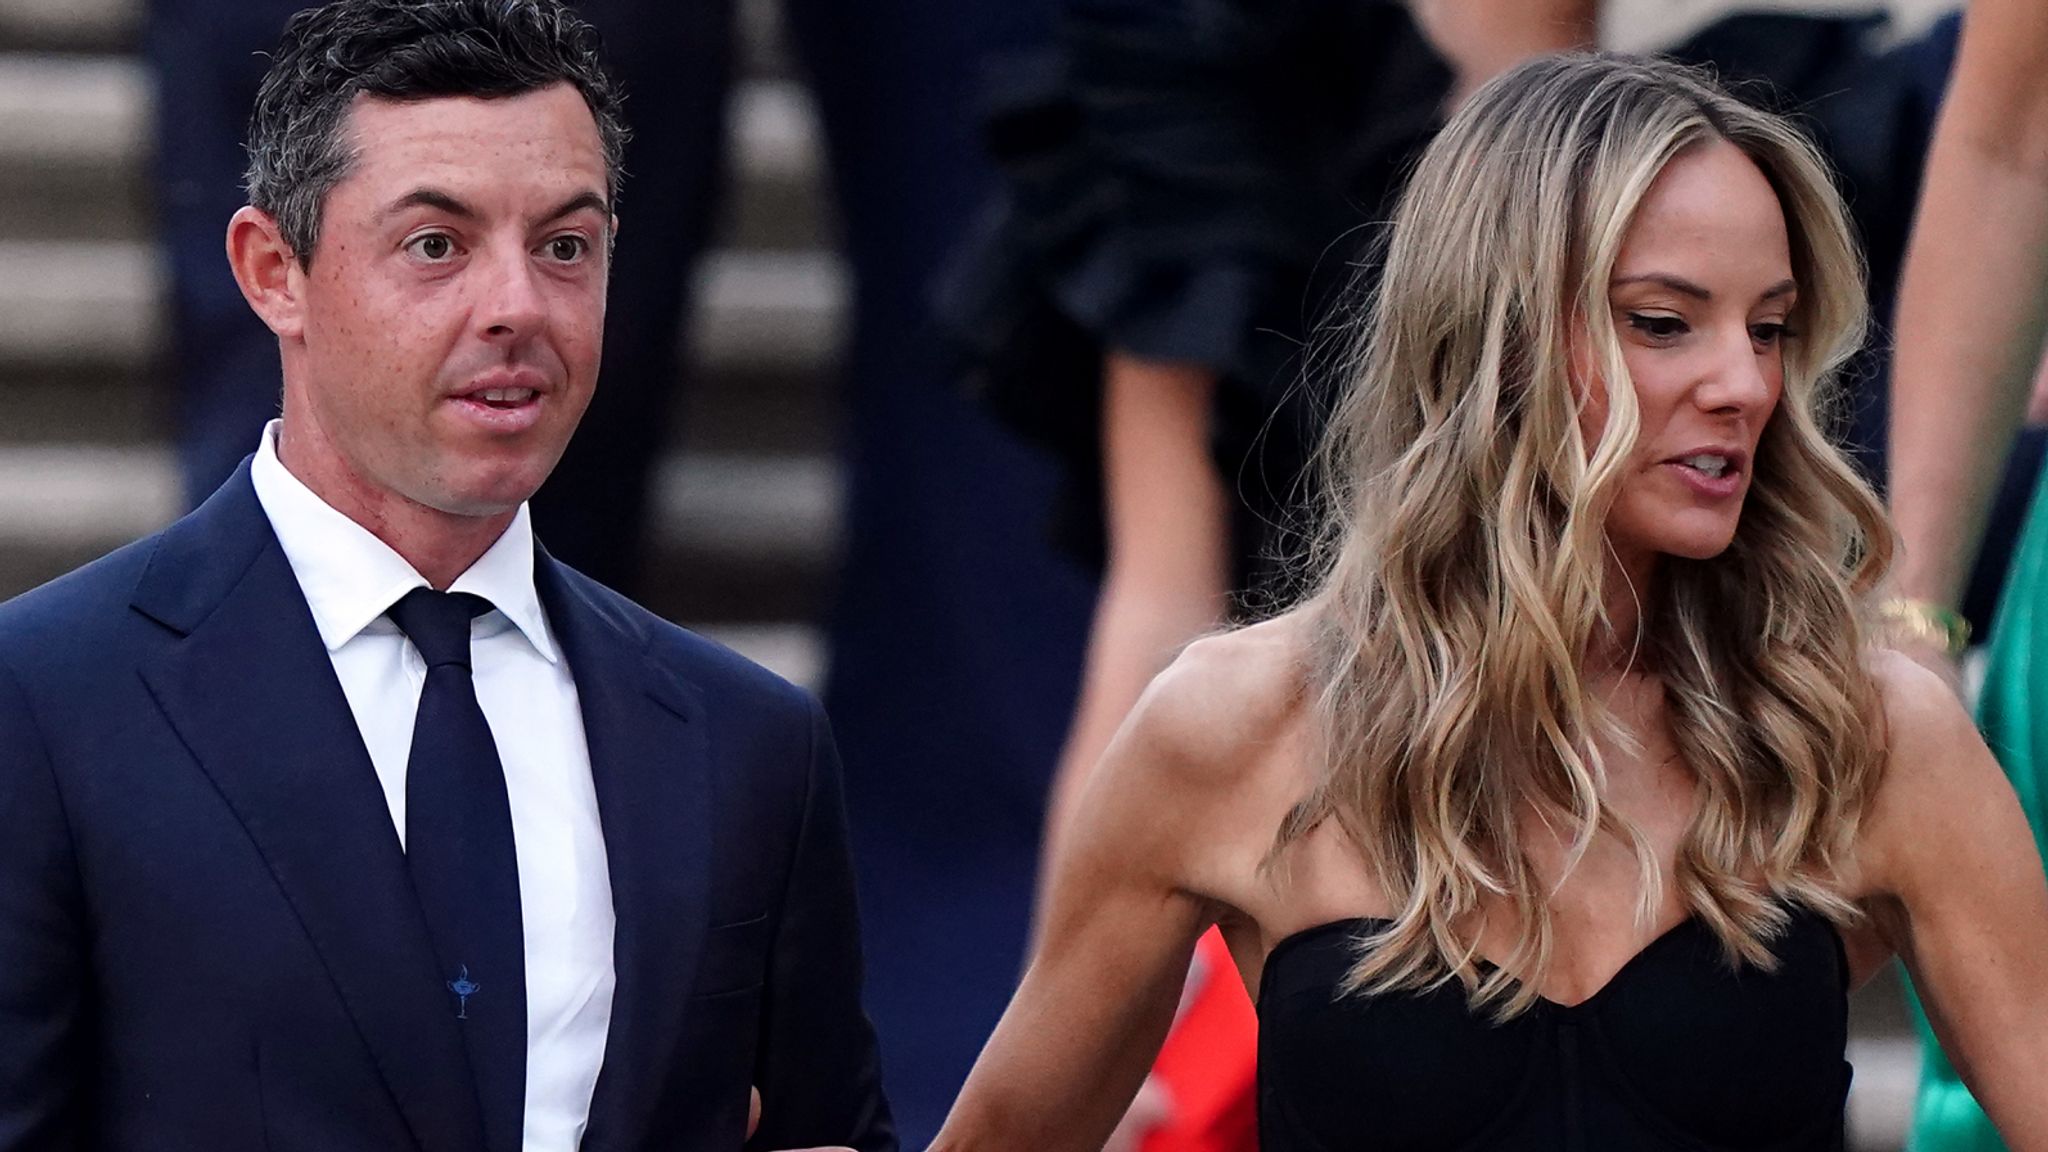 Rory McIlroy files for divorce from wife Erica ahead of PGA Championship  after seven years of marriage | Golf News | Sky Sports